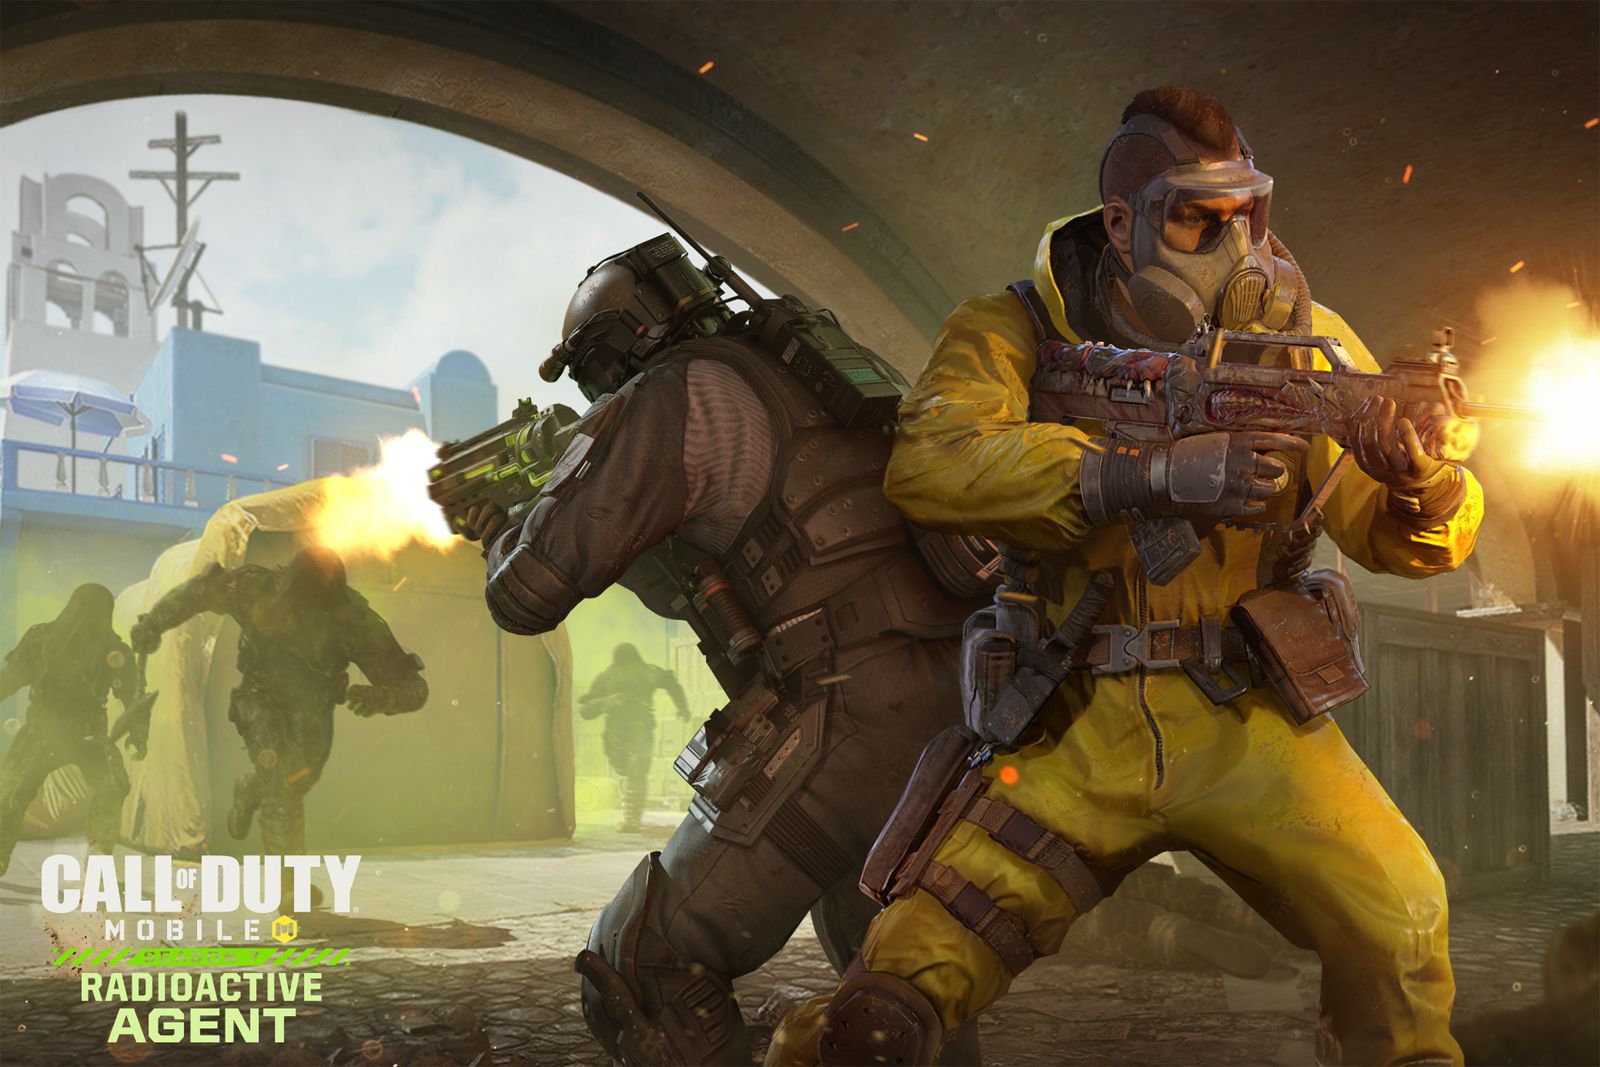 Call of duty mobile image 1